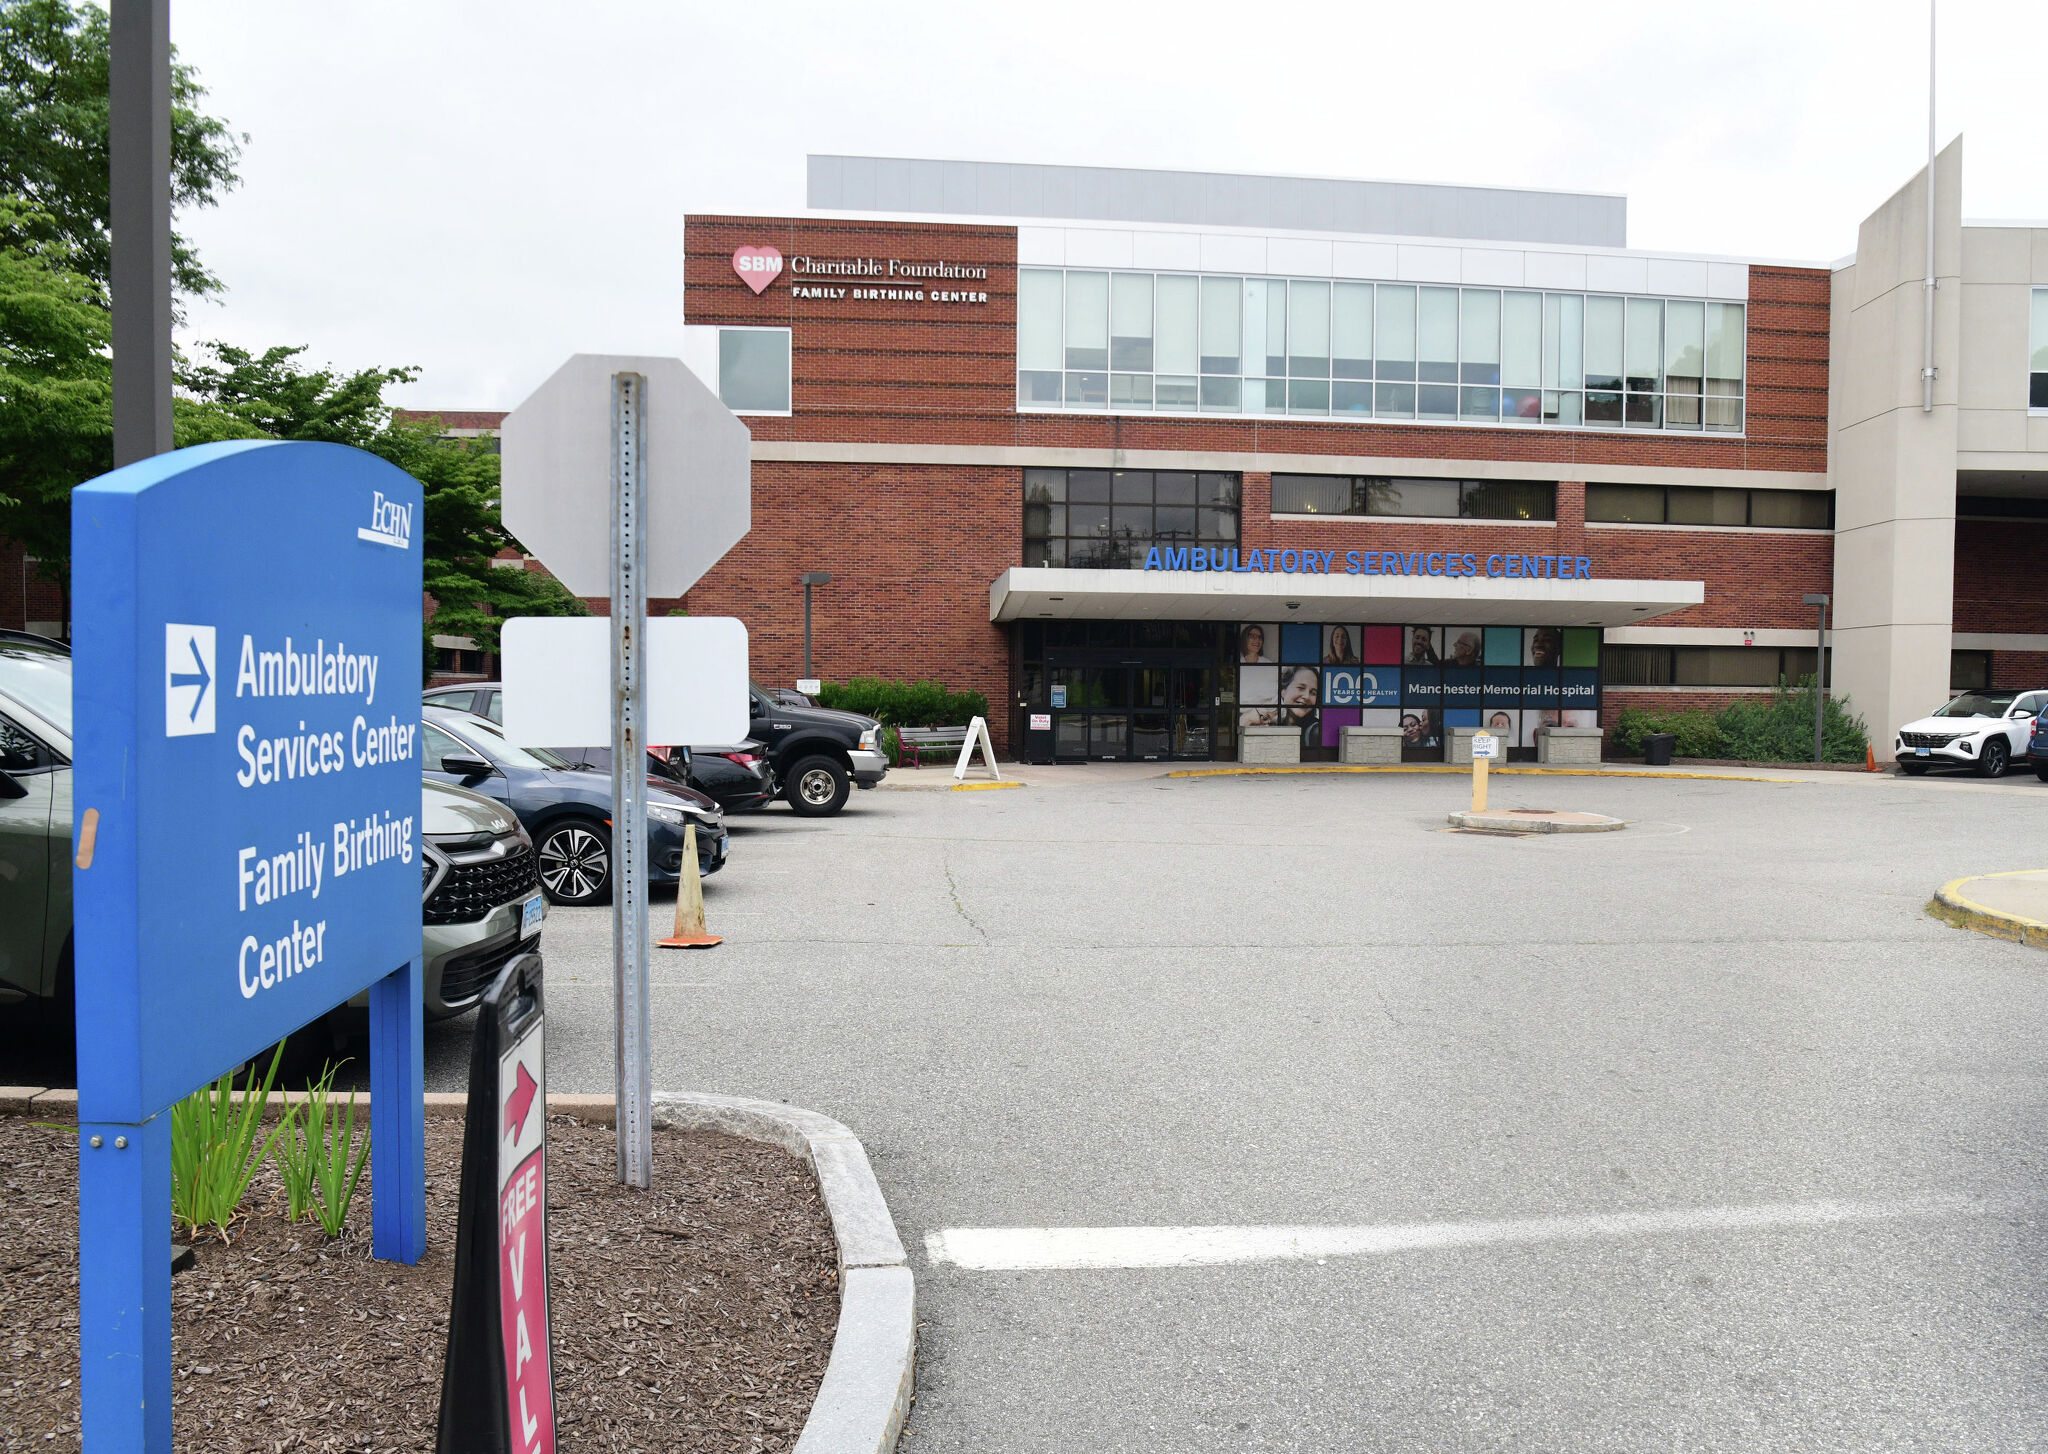 As its CT hospitals struggled, ECHN owner took out a $1.1B loan